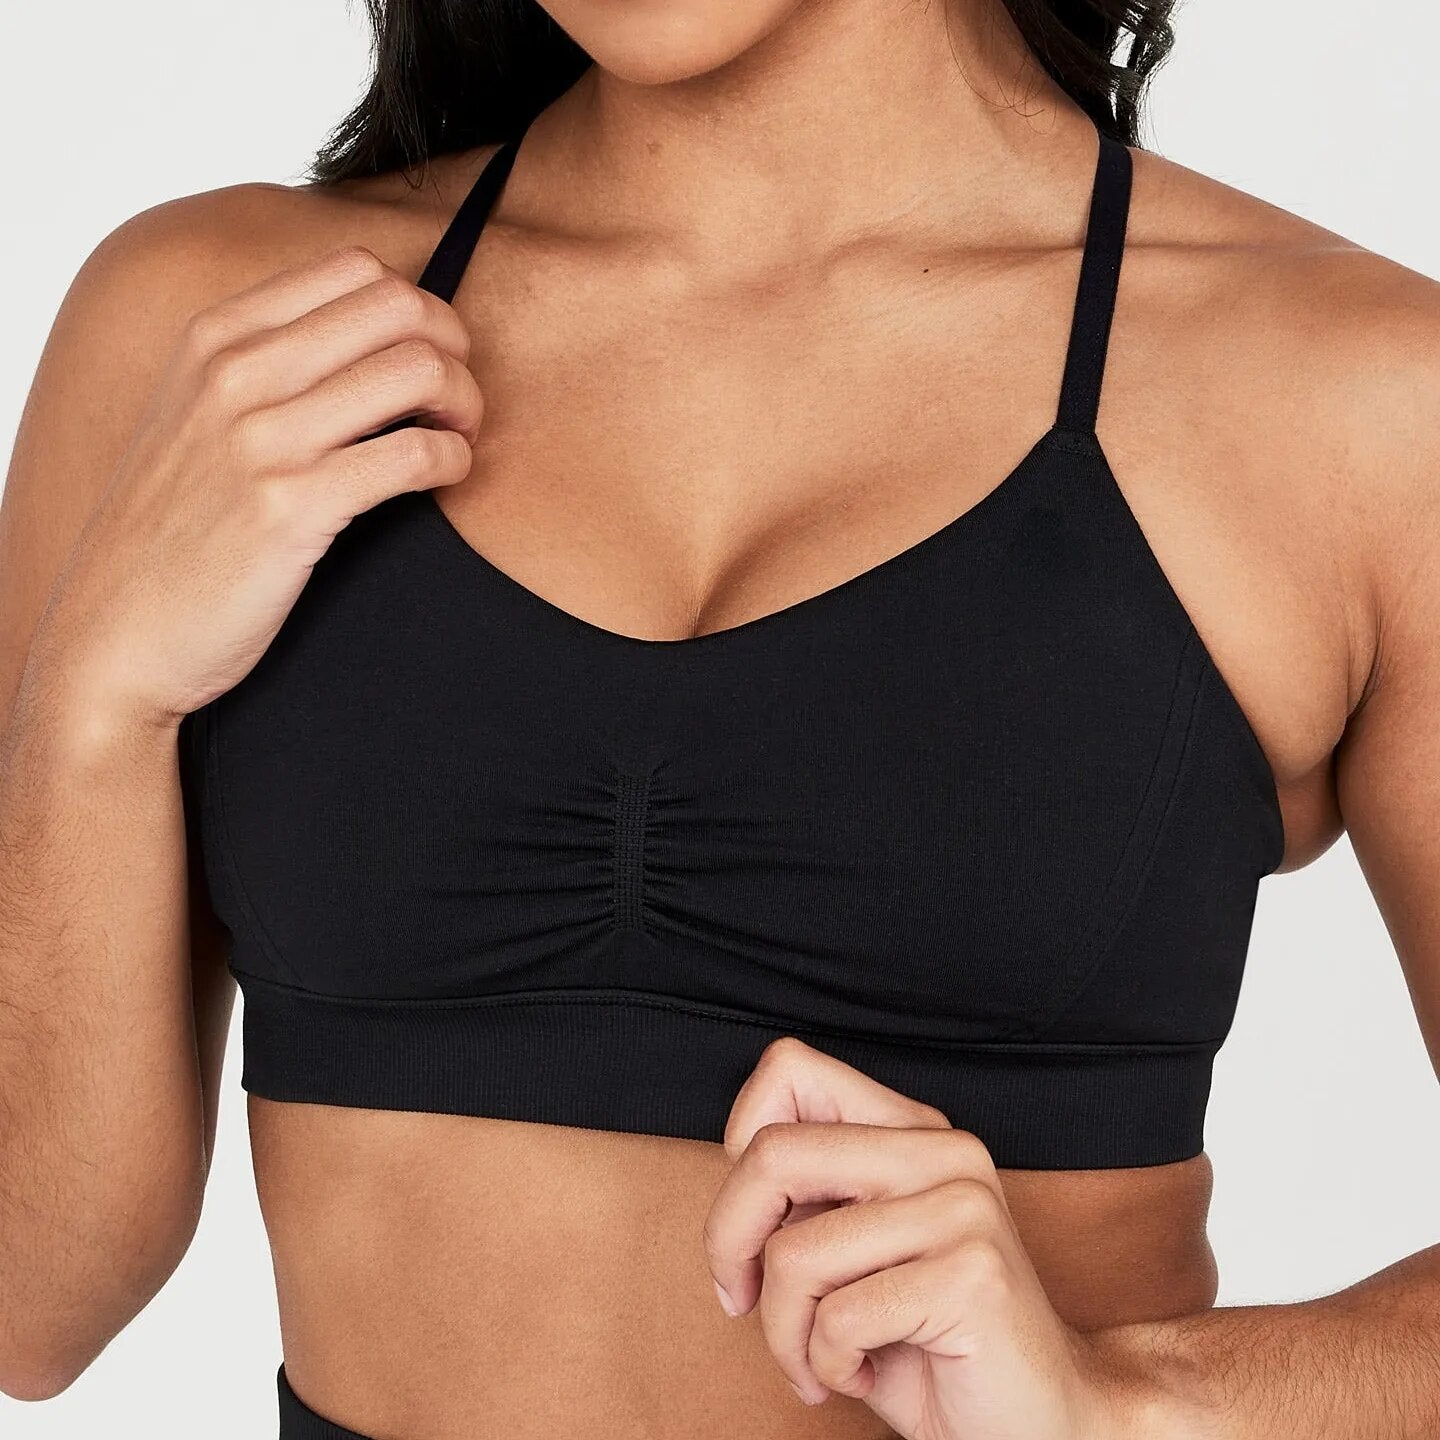 Callista Cross-Back Sports Bra: High-performance nylon/spandex blend for support in challenging workouts. Breathable design, quick-dry technology, and seamless comfort for unbeatable confidence in your fitness journey.